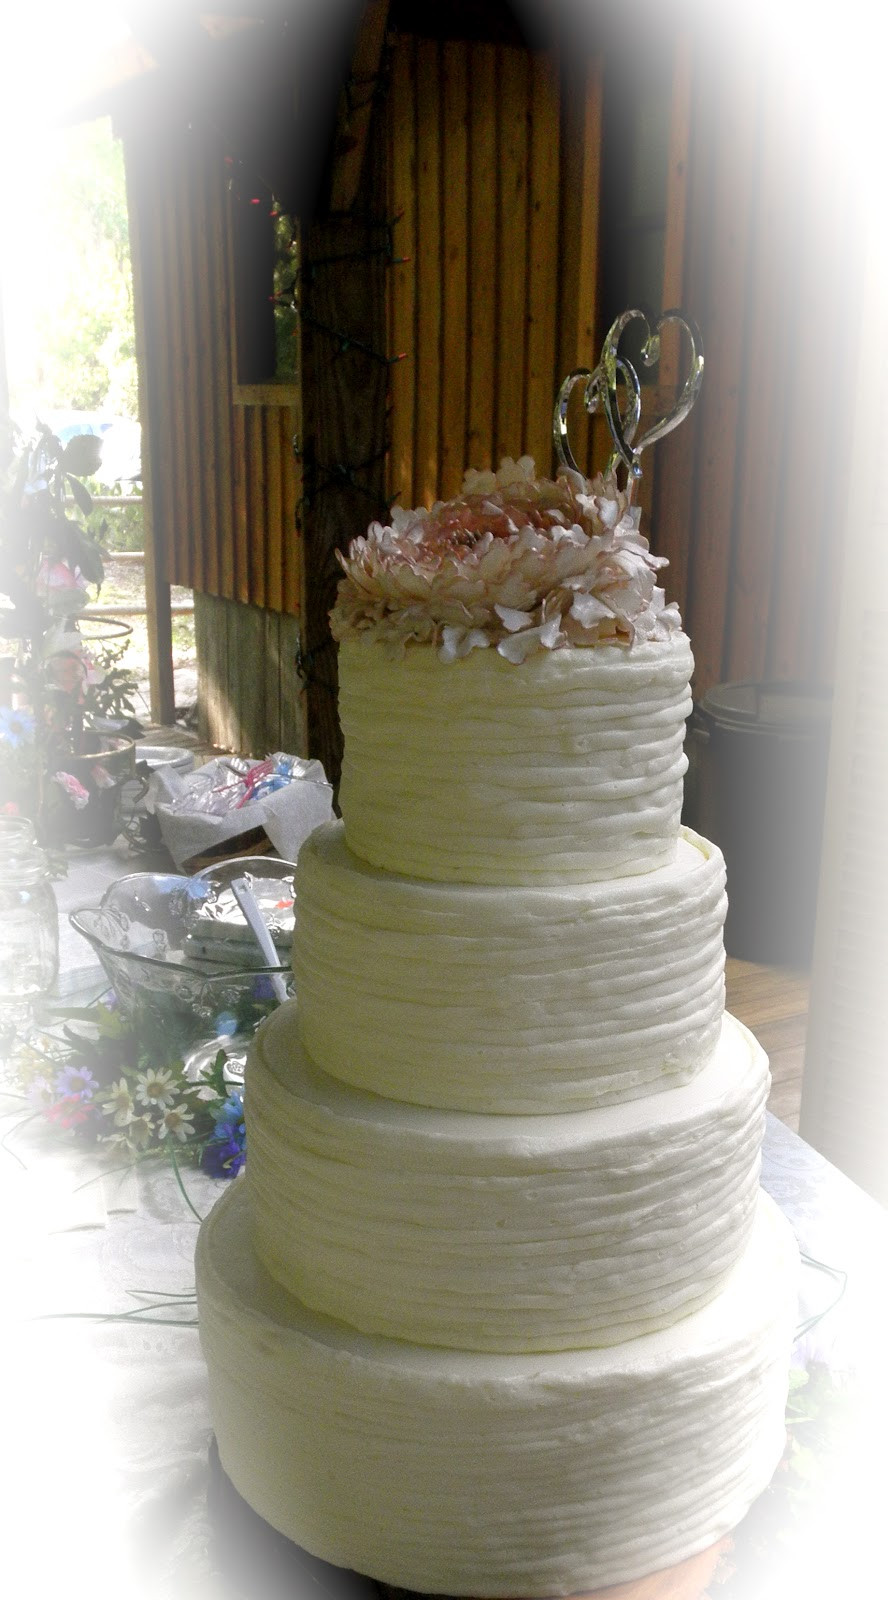 Rustic Chic Wedding Cakes
 Sweet T s Cake Design Shabby Chic Peony Rustic Wedding Cake